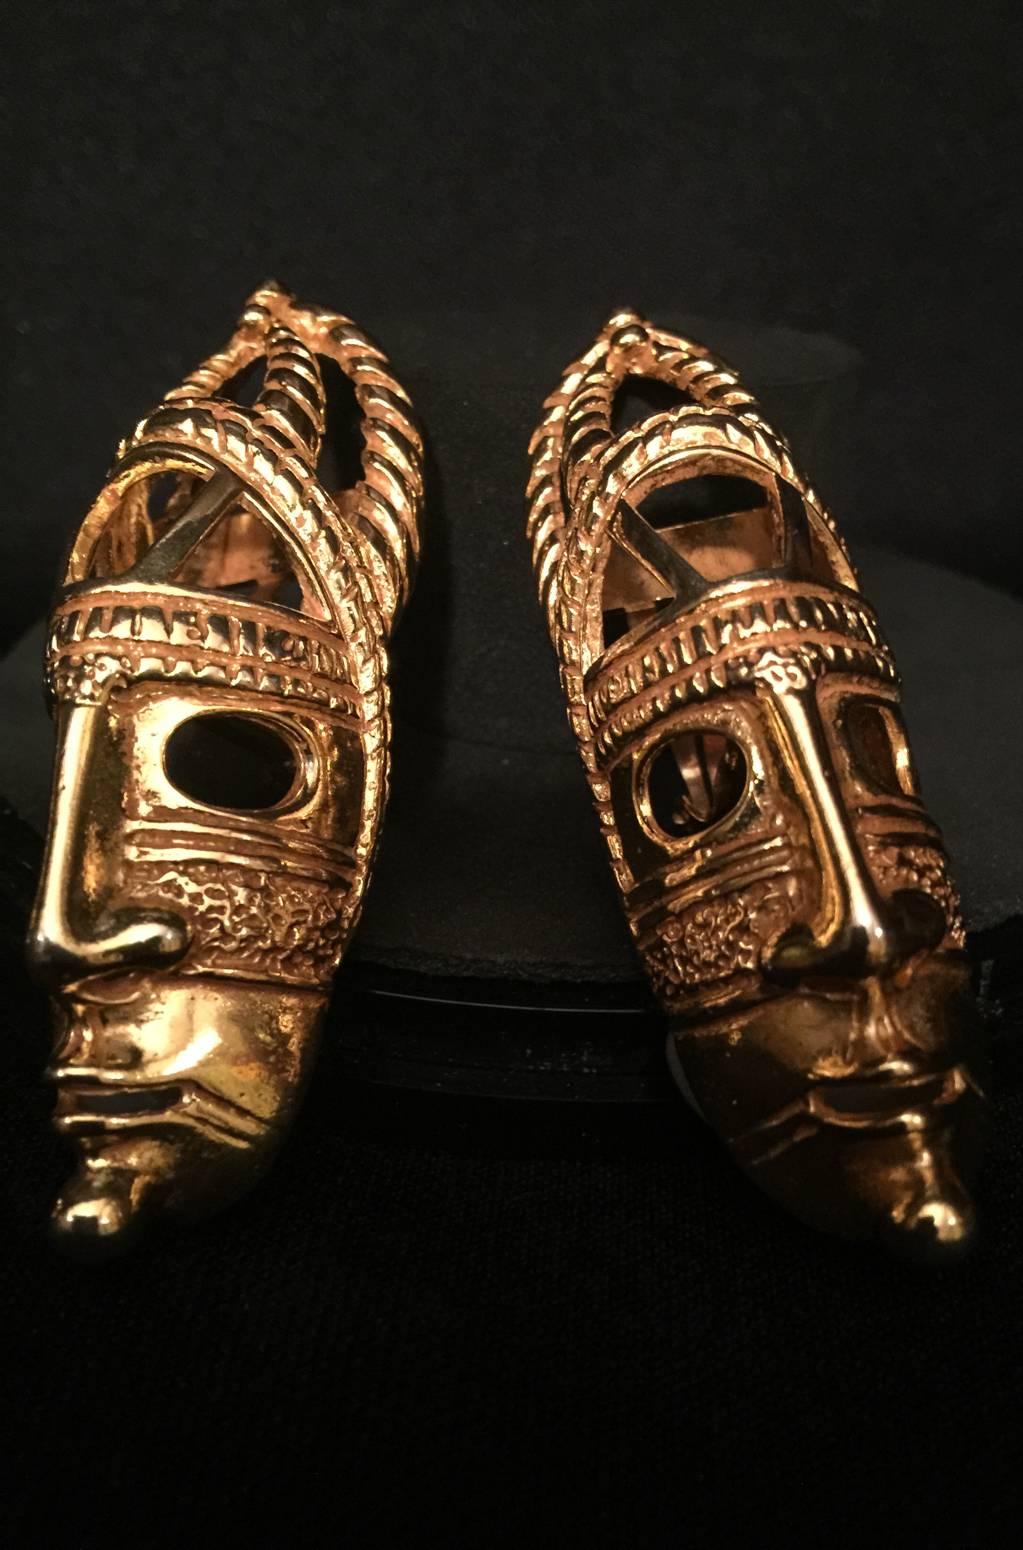 A striking pair of goldtone tribal mask earrings by master jewelry designer Dominique Aurientis.  Signed Dominique Aurientis PARIS in an oval. These earrings will 